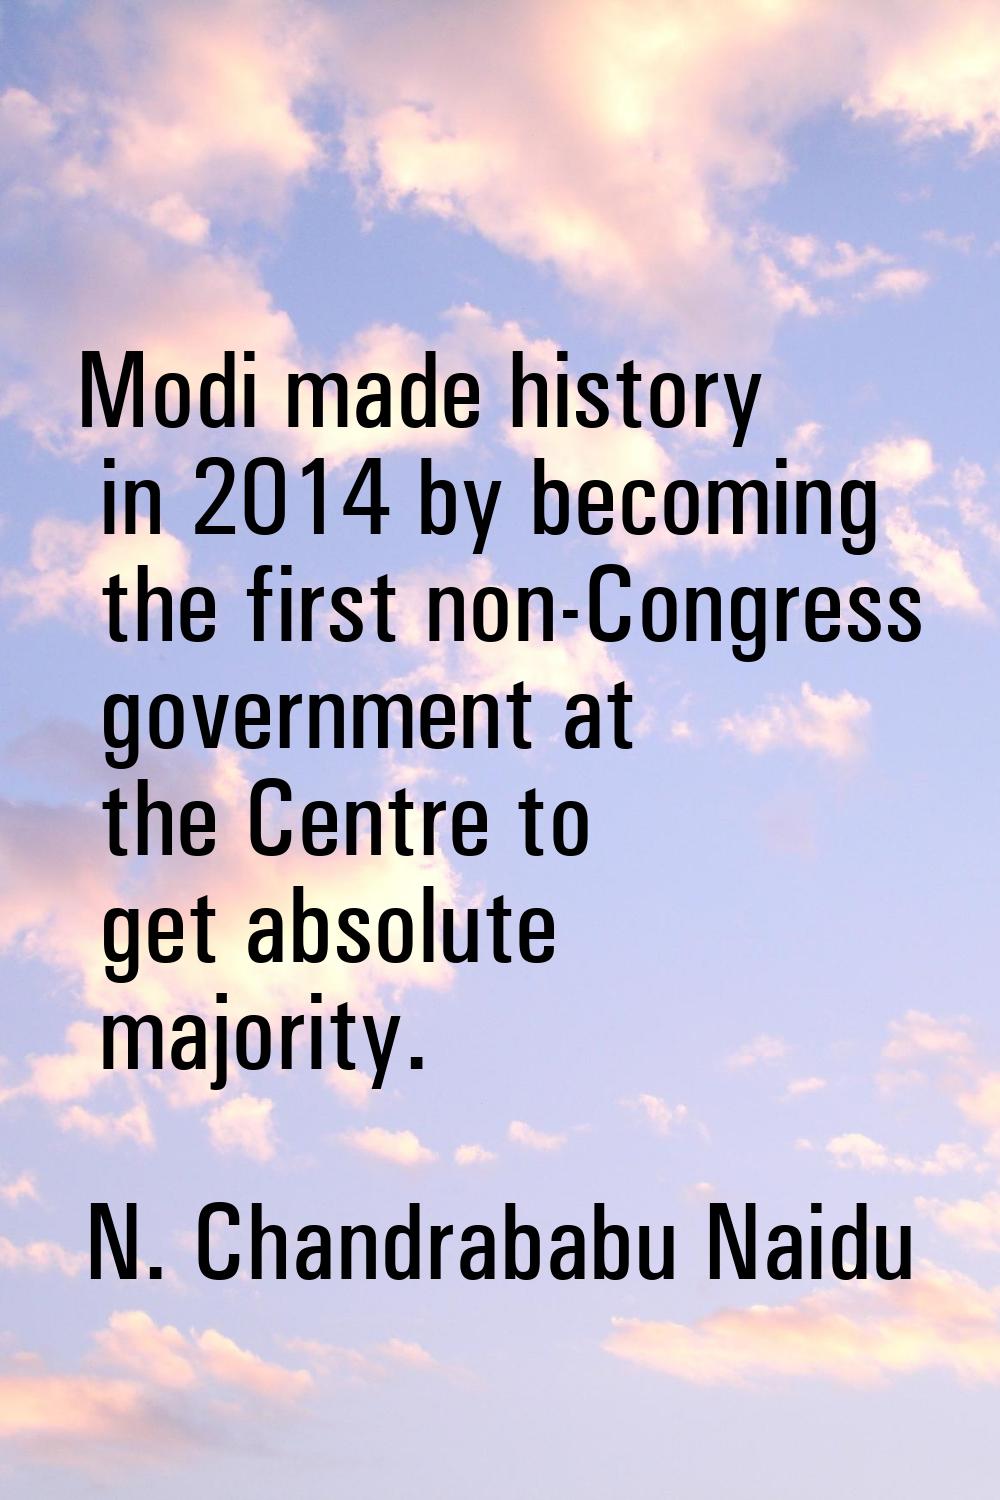 Modi made history in 2014 by becoming the first non-Congress government at the Centre to get absolu